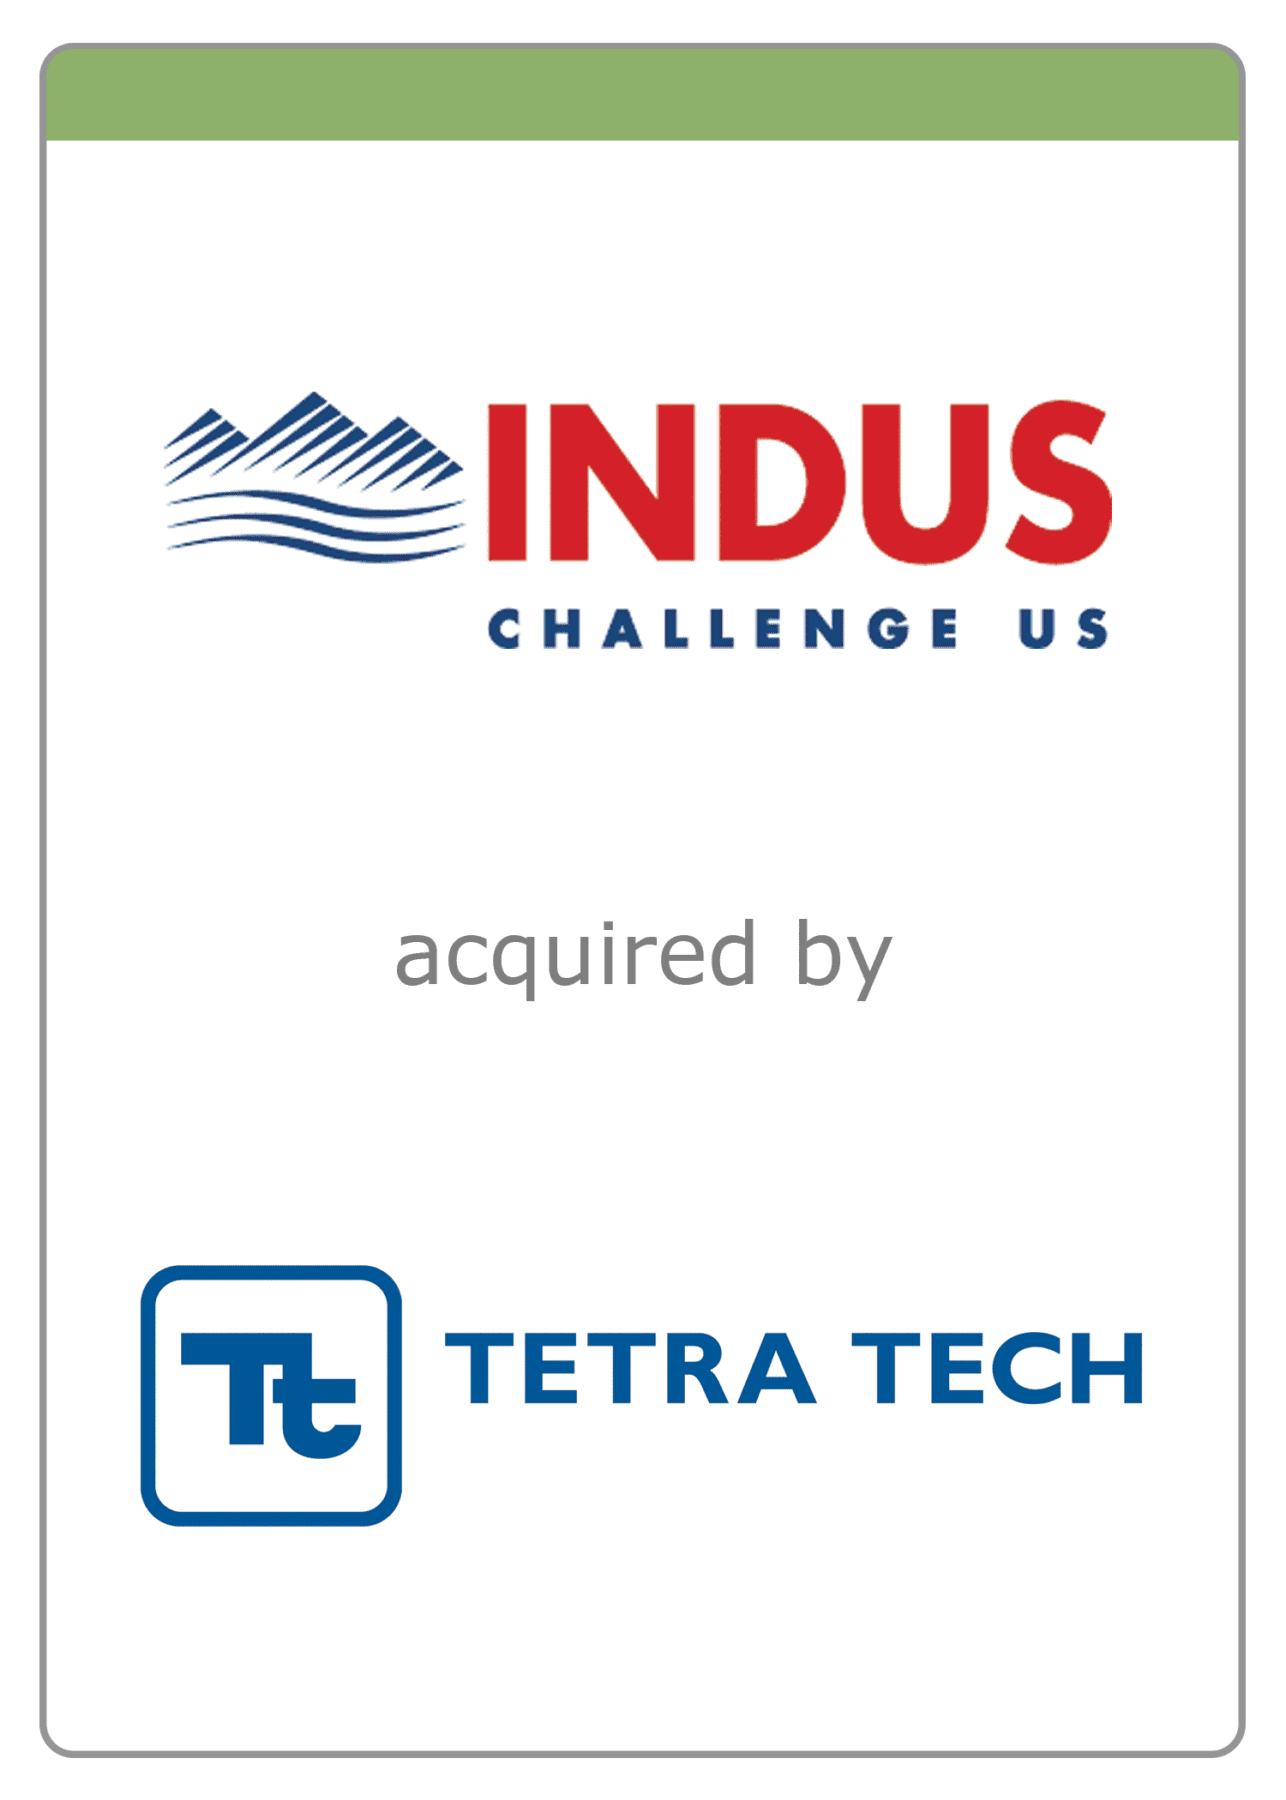 INDUS Acquired by Tetra Tech